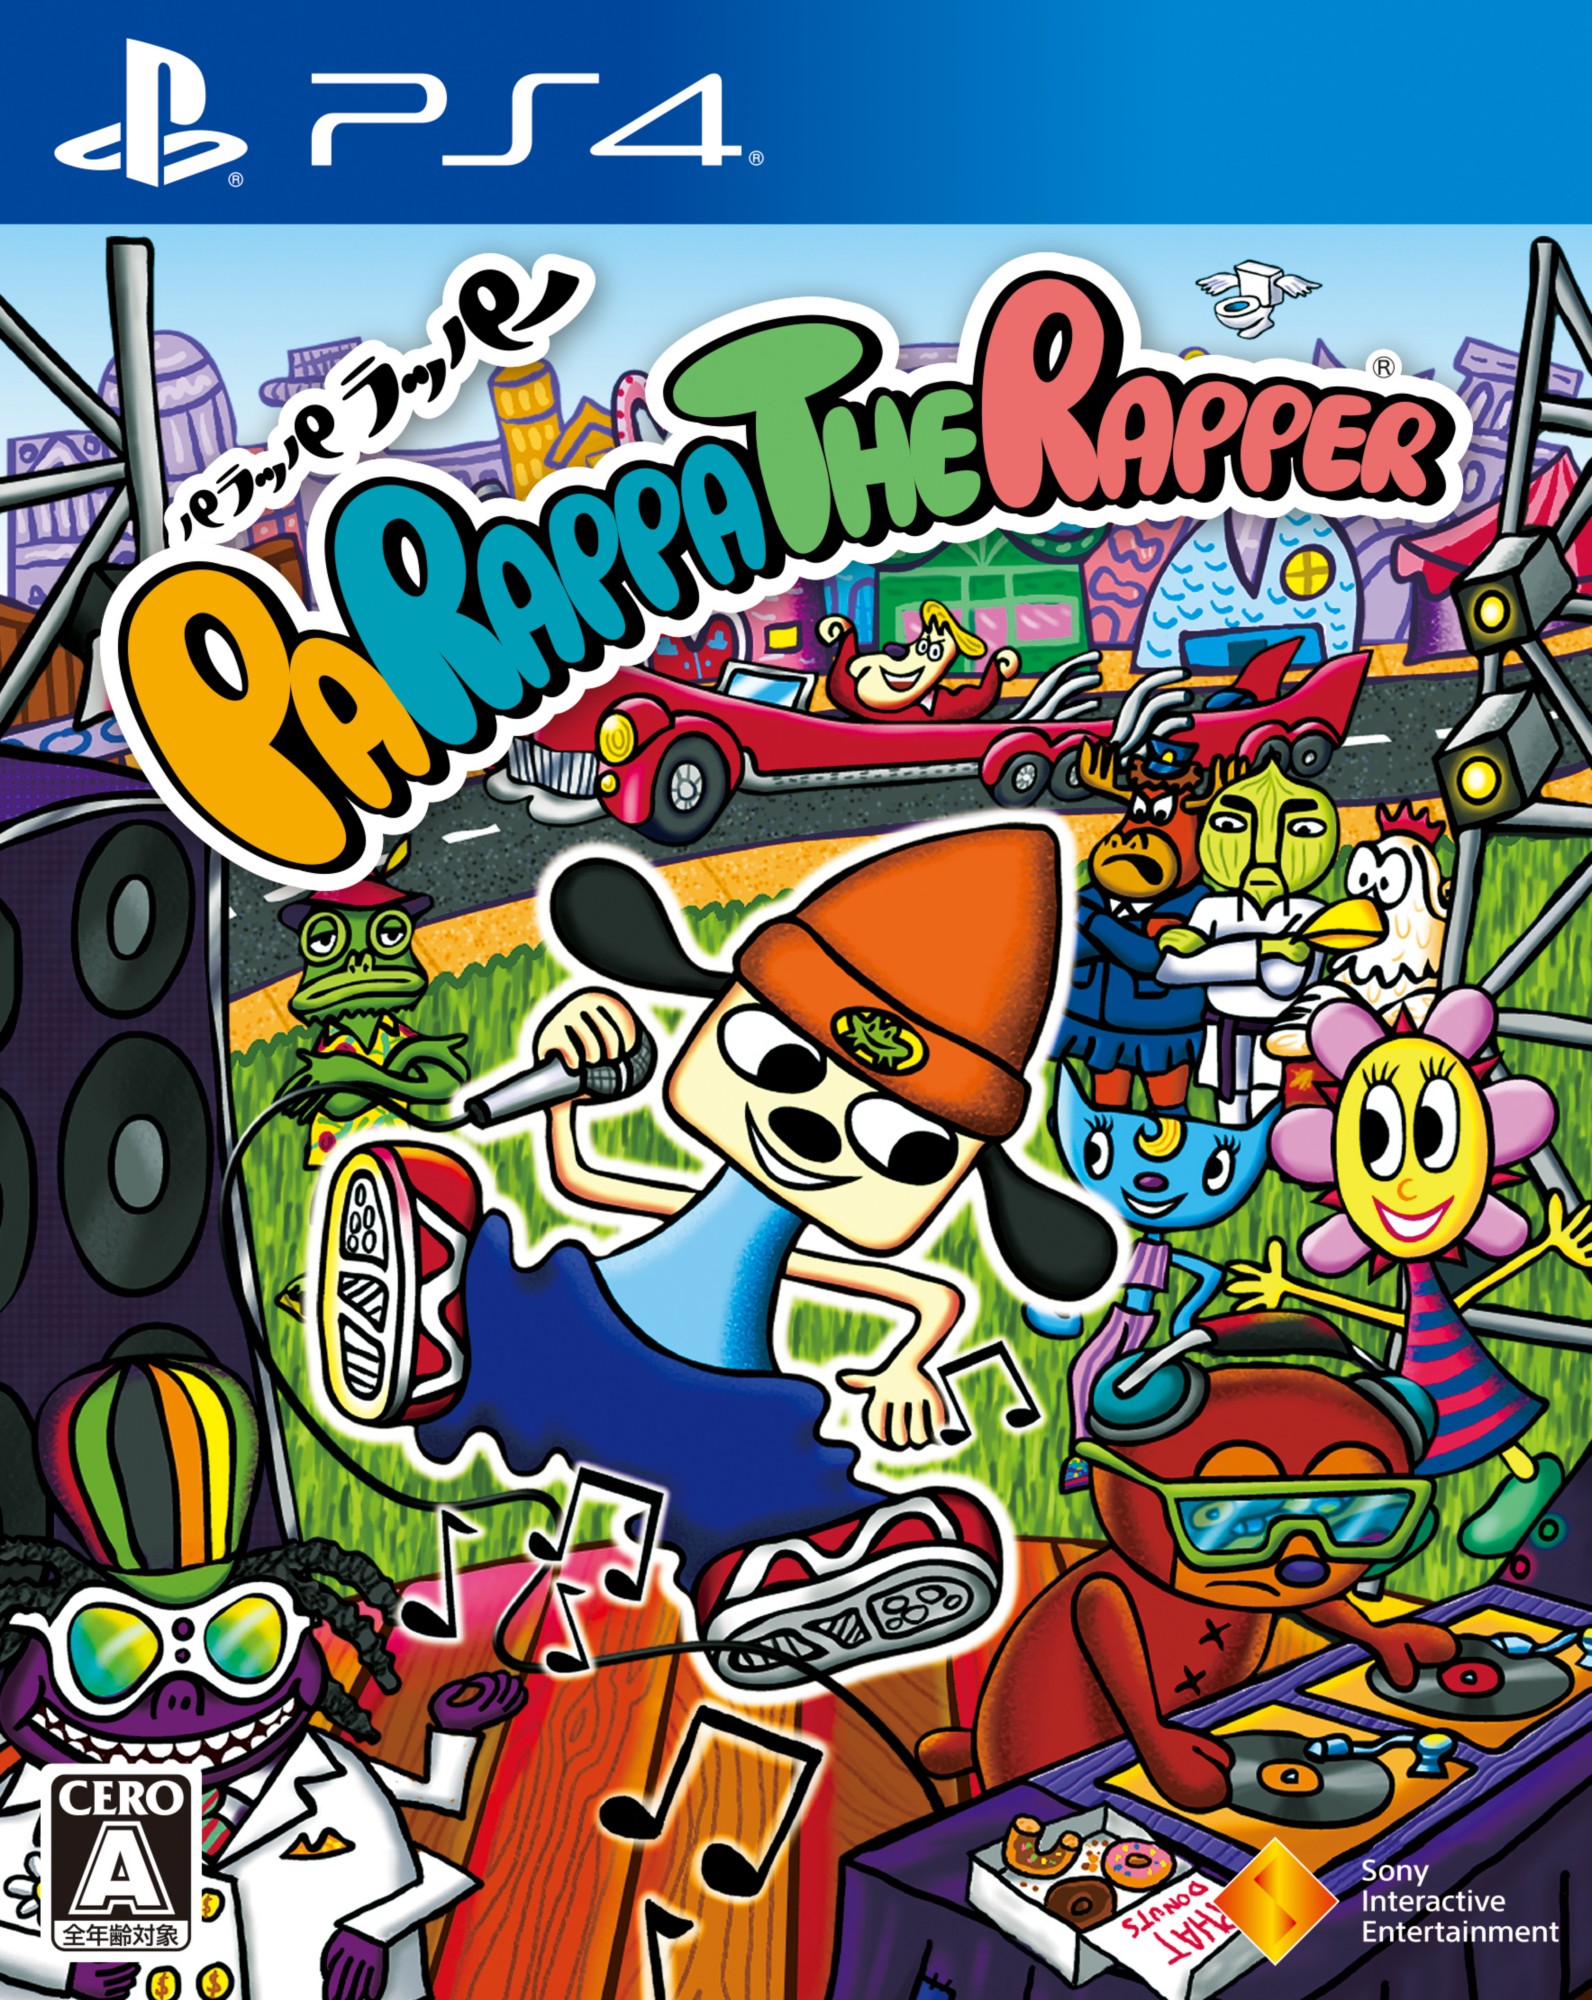 It looks like PS4 Parappa Remastered is the PSP game running under